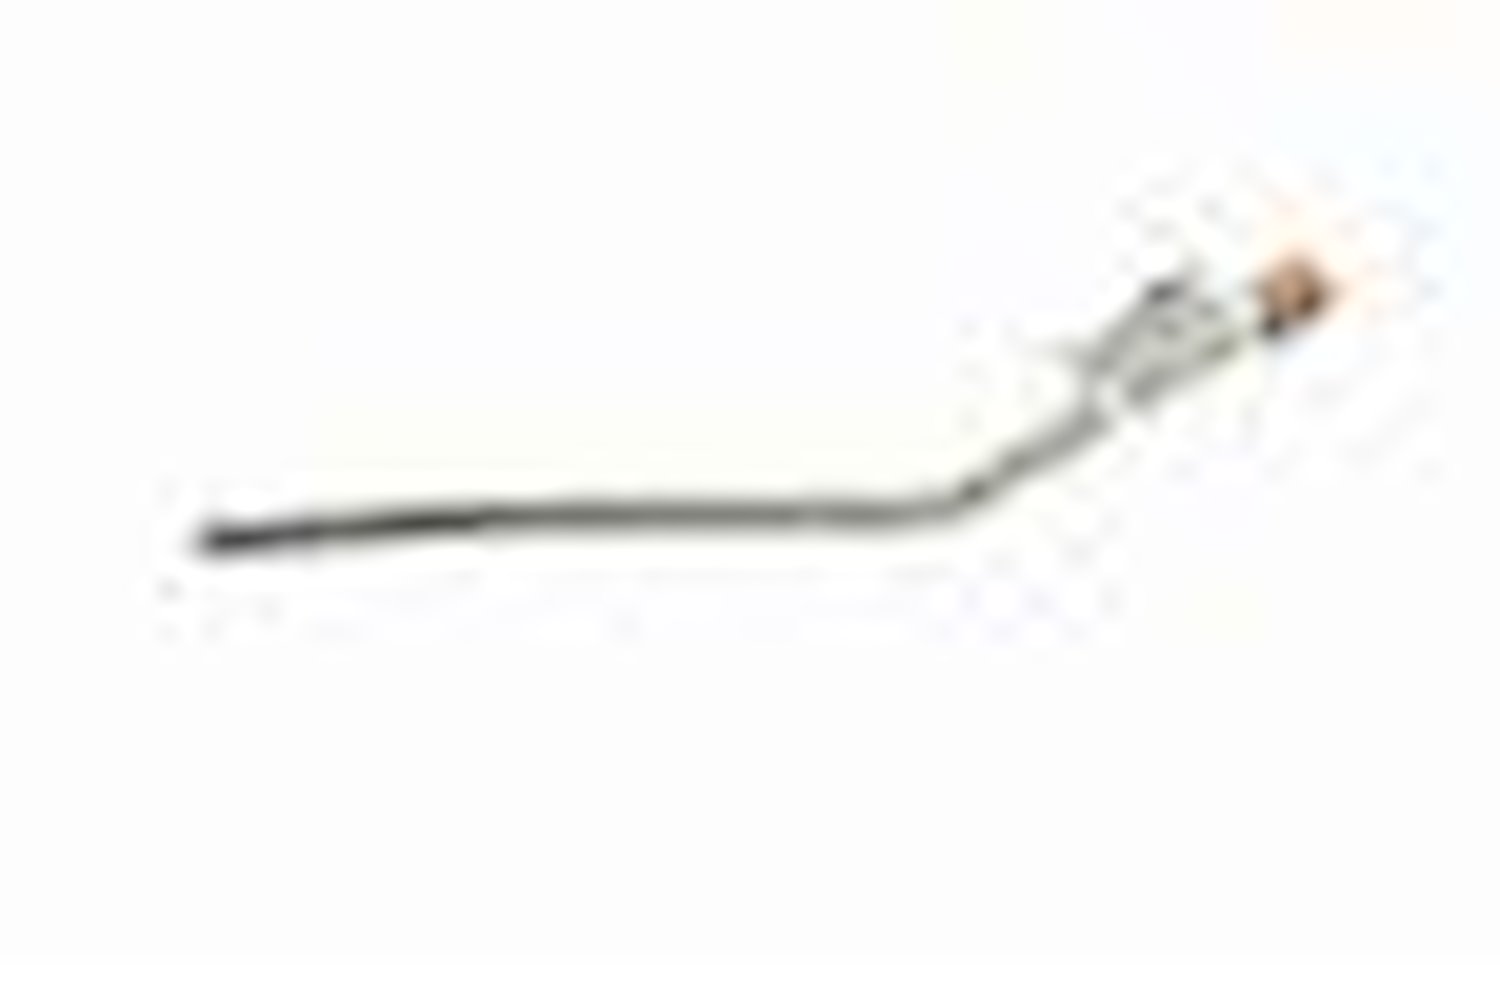 Ford Torino Brake Booster Vacuum Lines for the 428 CID Except Shelby -1968 1969